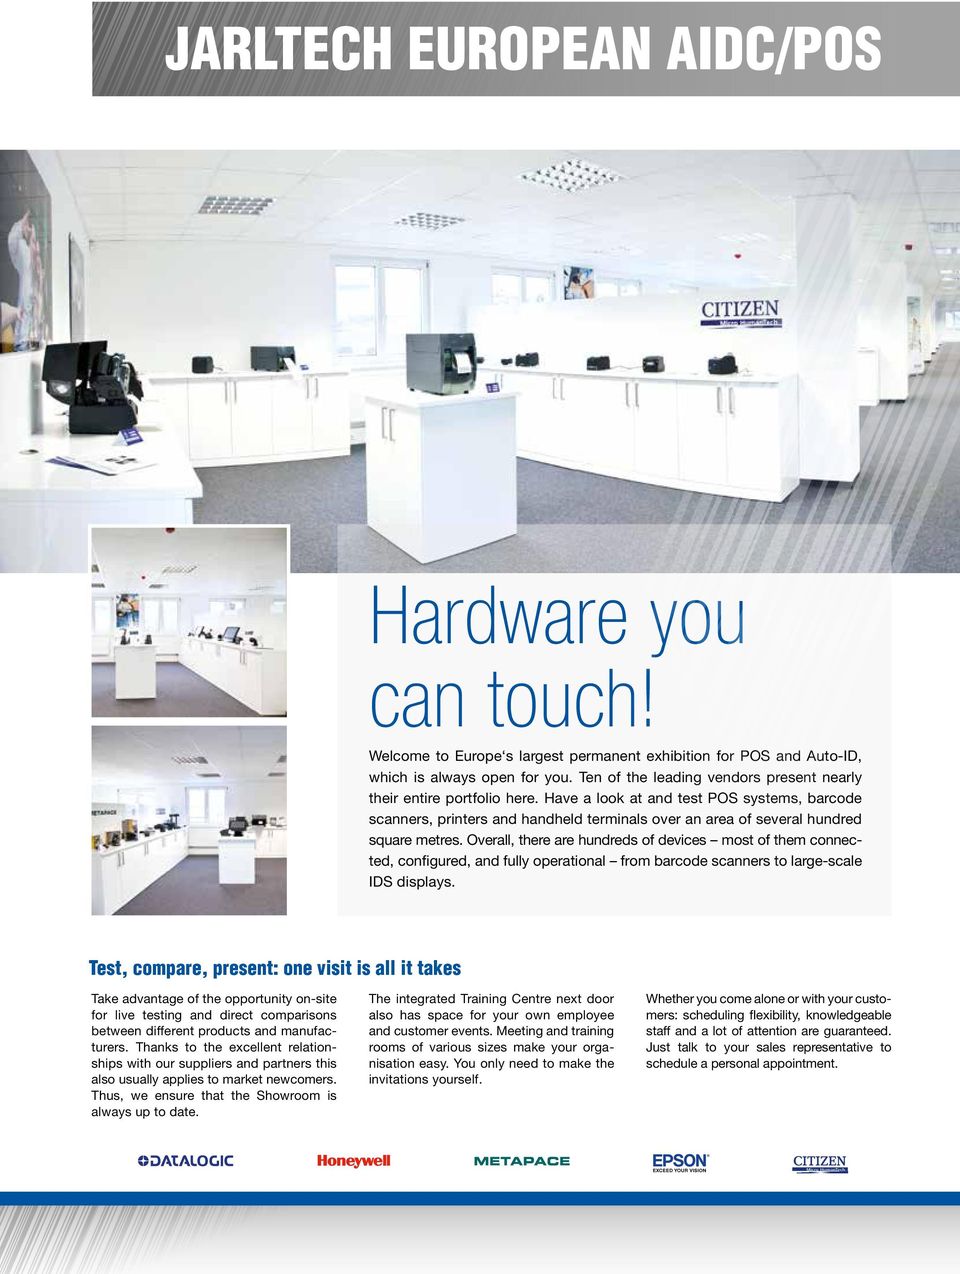 Have a look at and test POS systems, barcode scanners, printers and handheld terminals over an area of several hundred square metres.